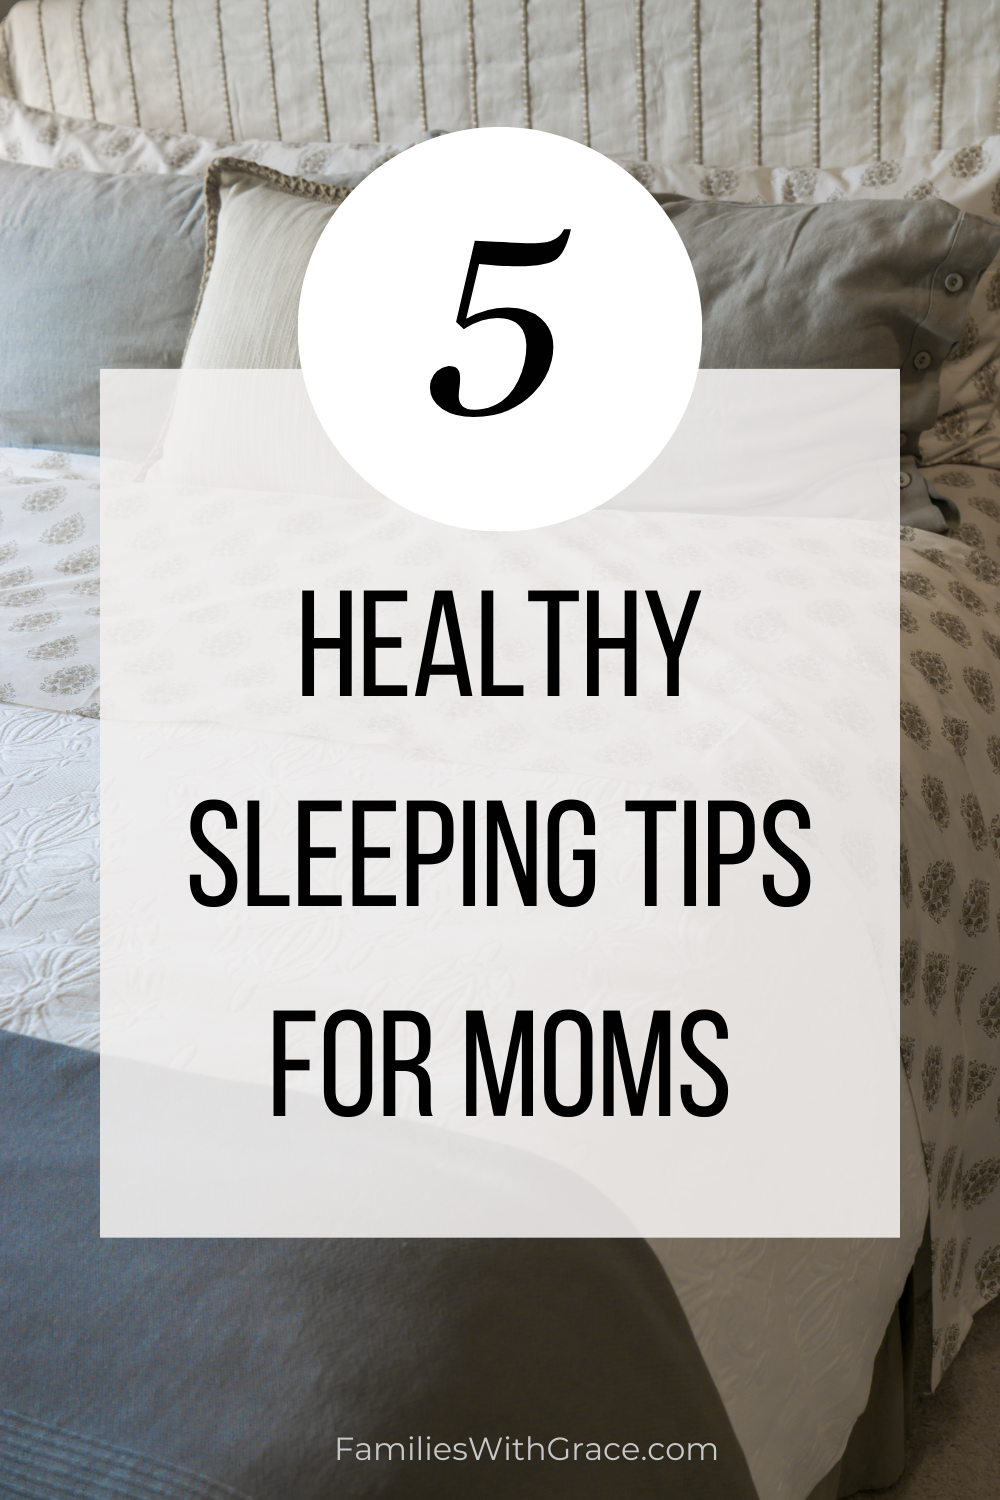 How to get better sleep for moms